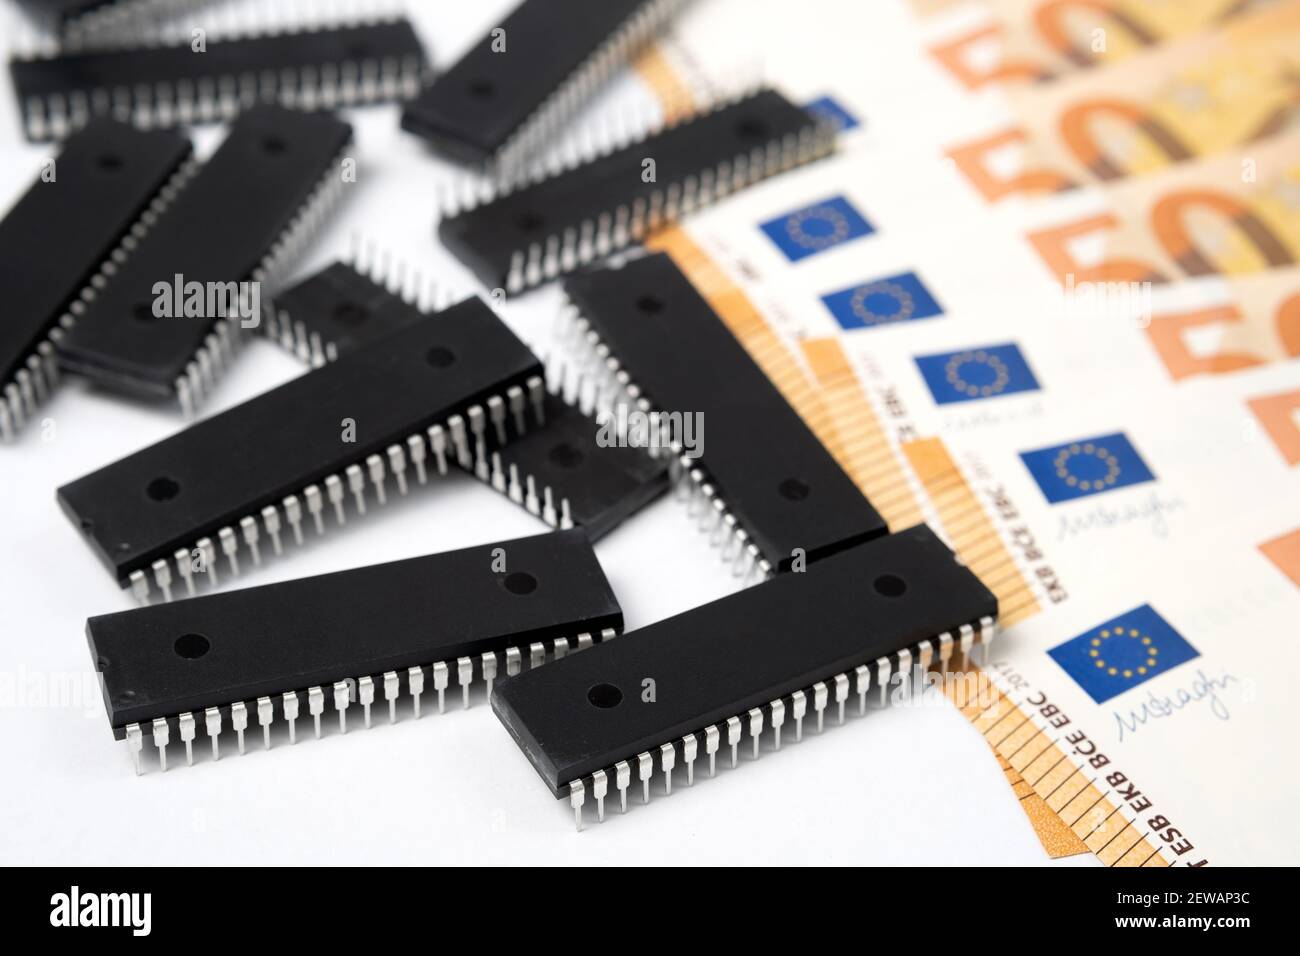 Semiconductor chips shortage and high price. Pile of computer chips and spread of  Euro banknotes. Concept for crisis in the industry. Stock Photo